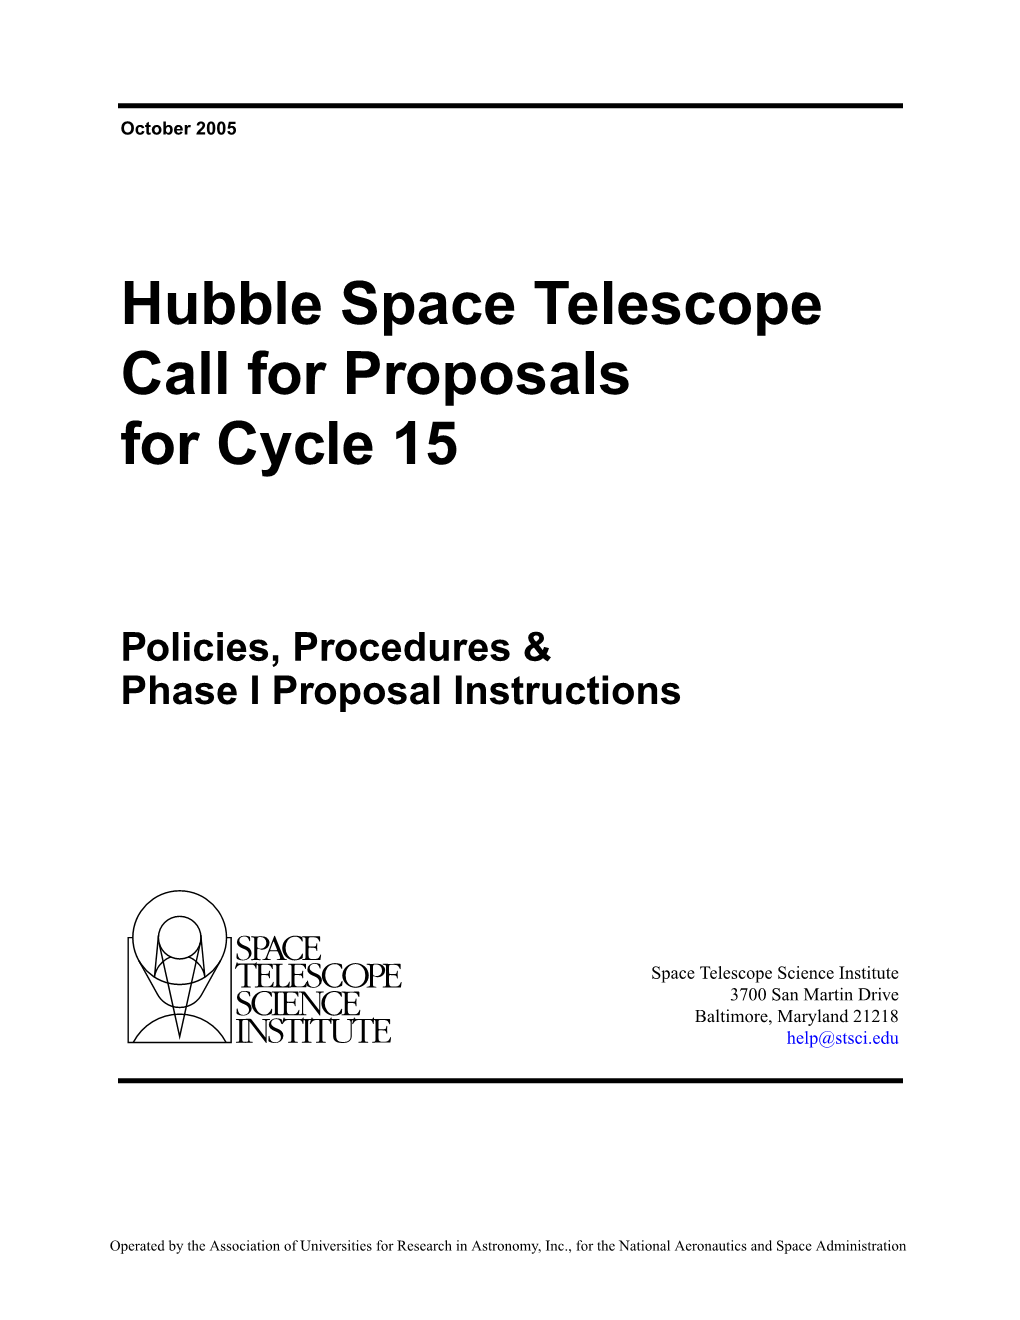 Hubble Space Telescope Call for Proposals for Cycle 15